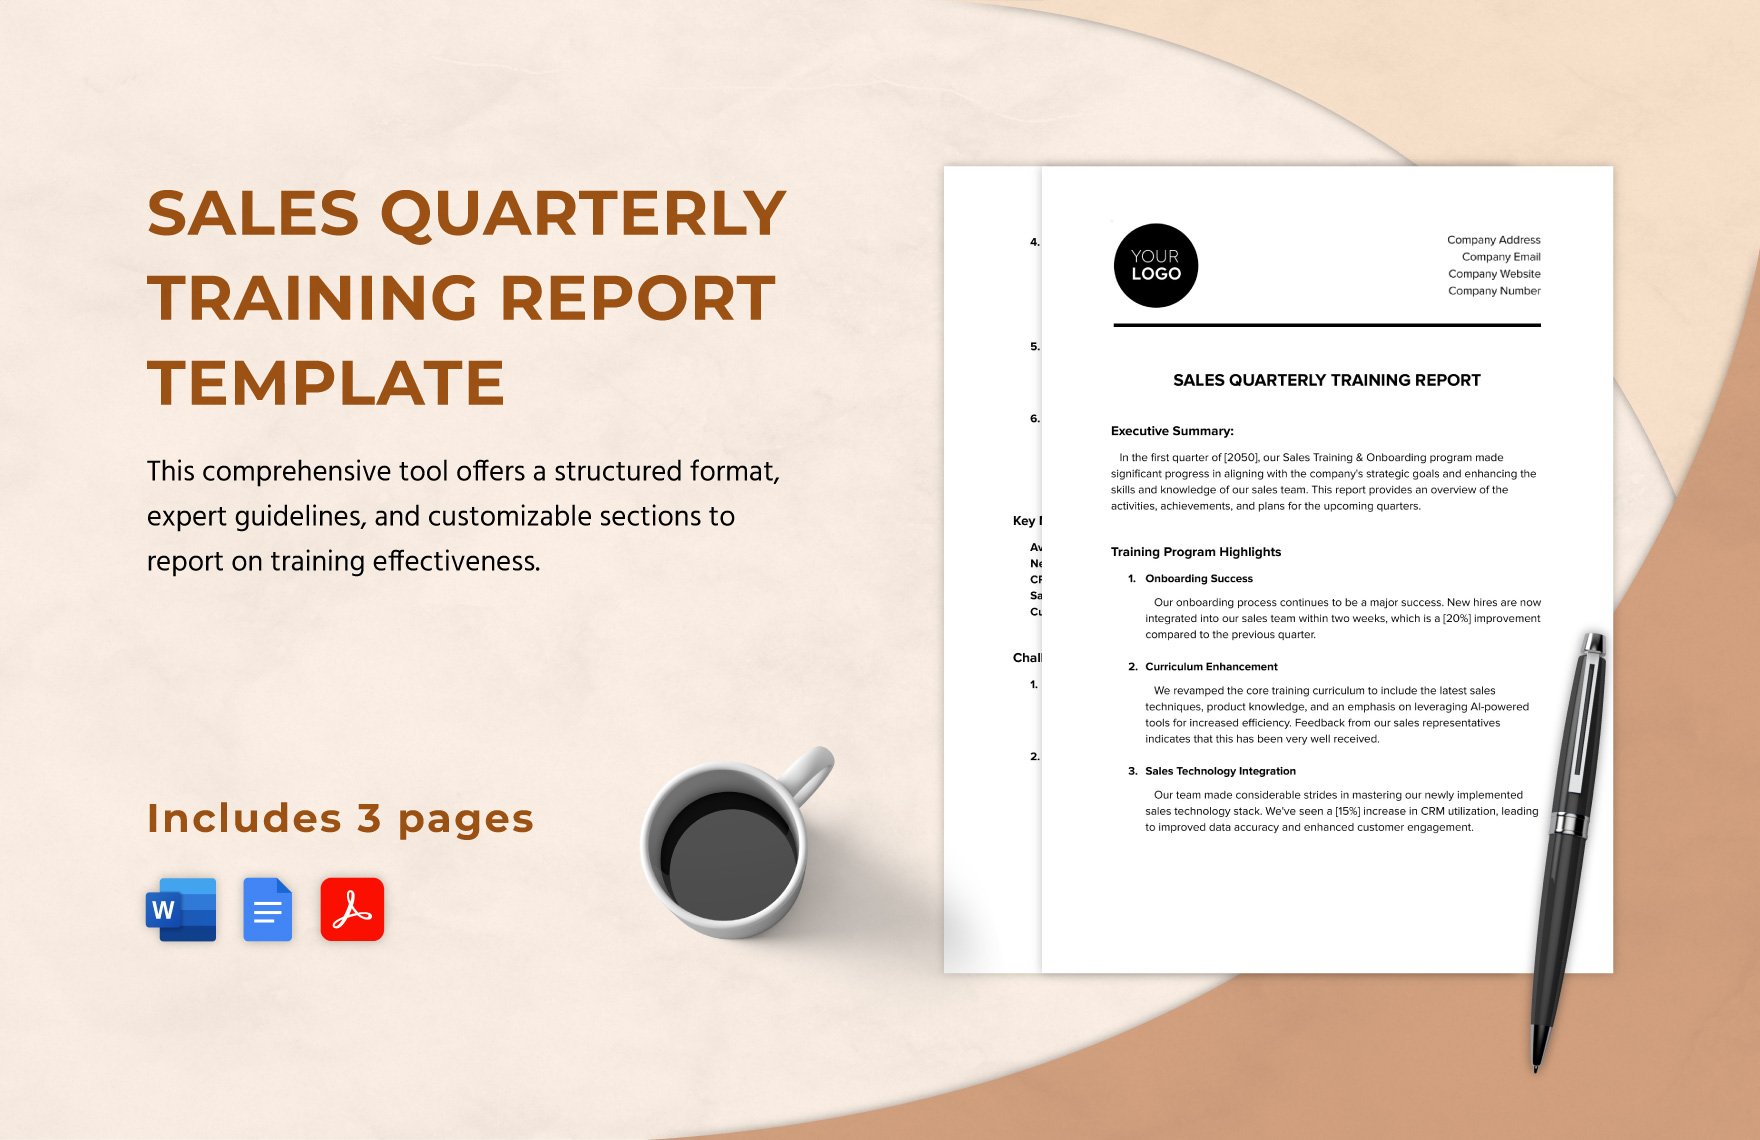 Sales Quarterly Training Report Template in Word, Google Docs, PDF